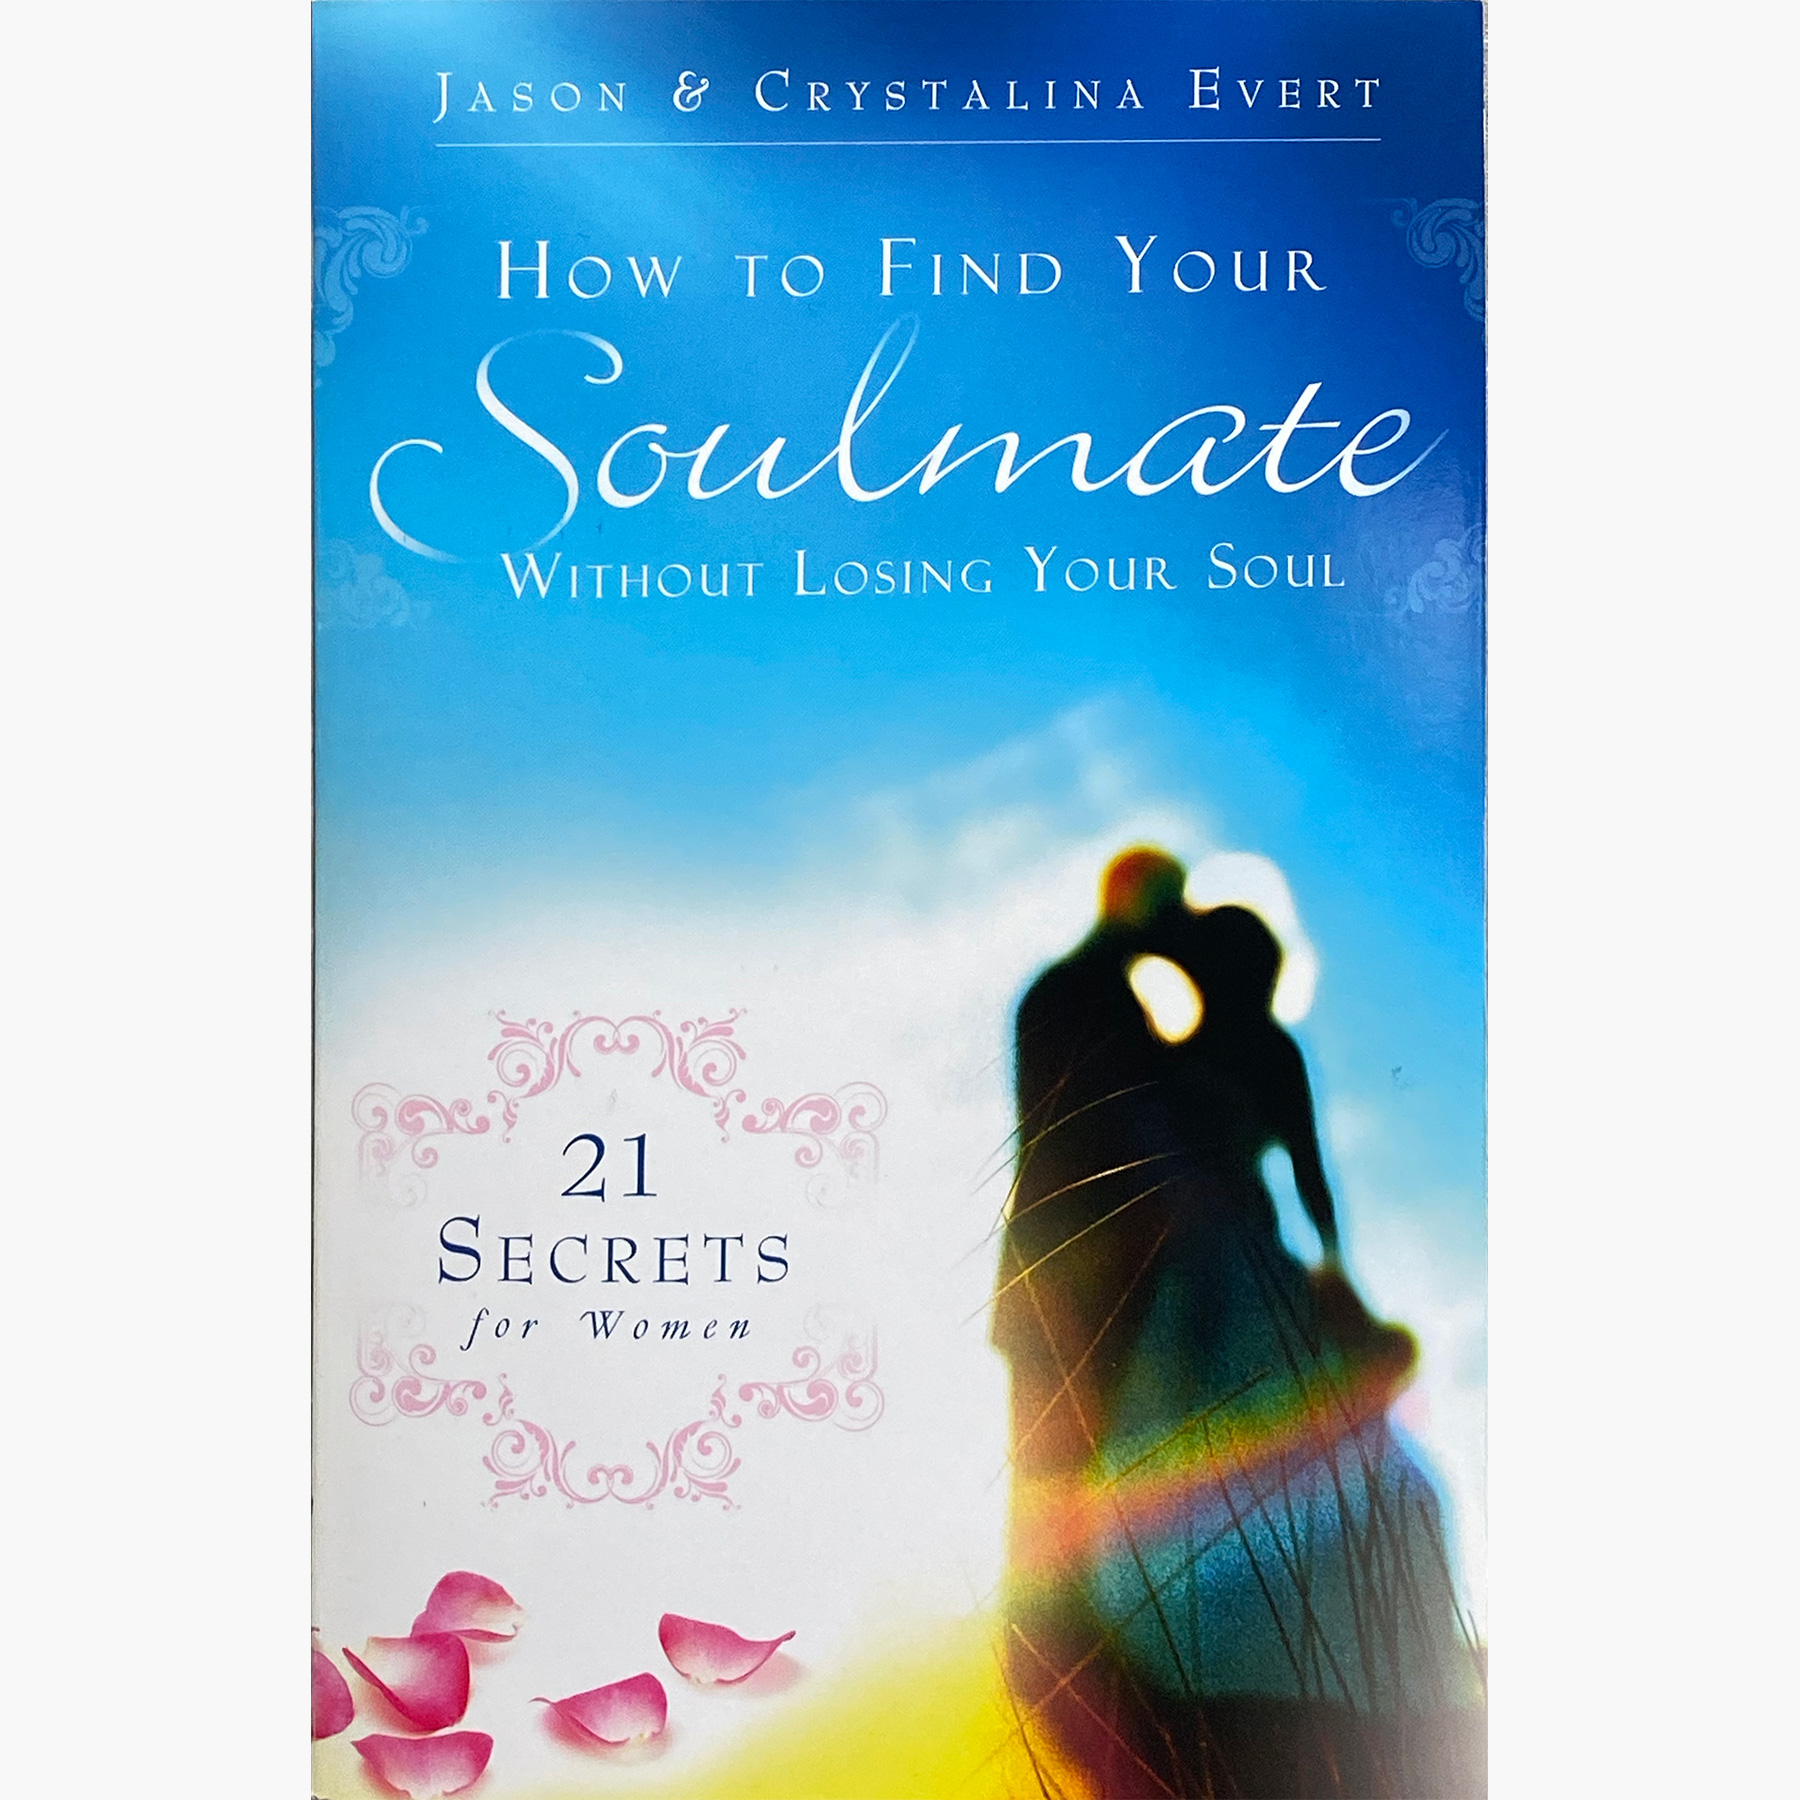 Prayer for your soulmate